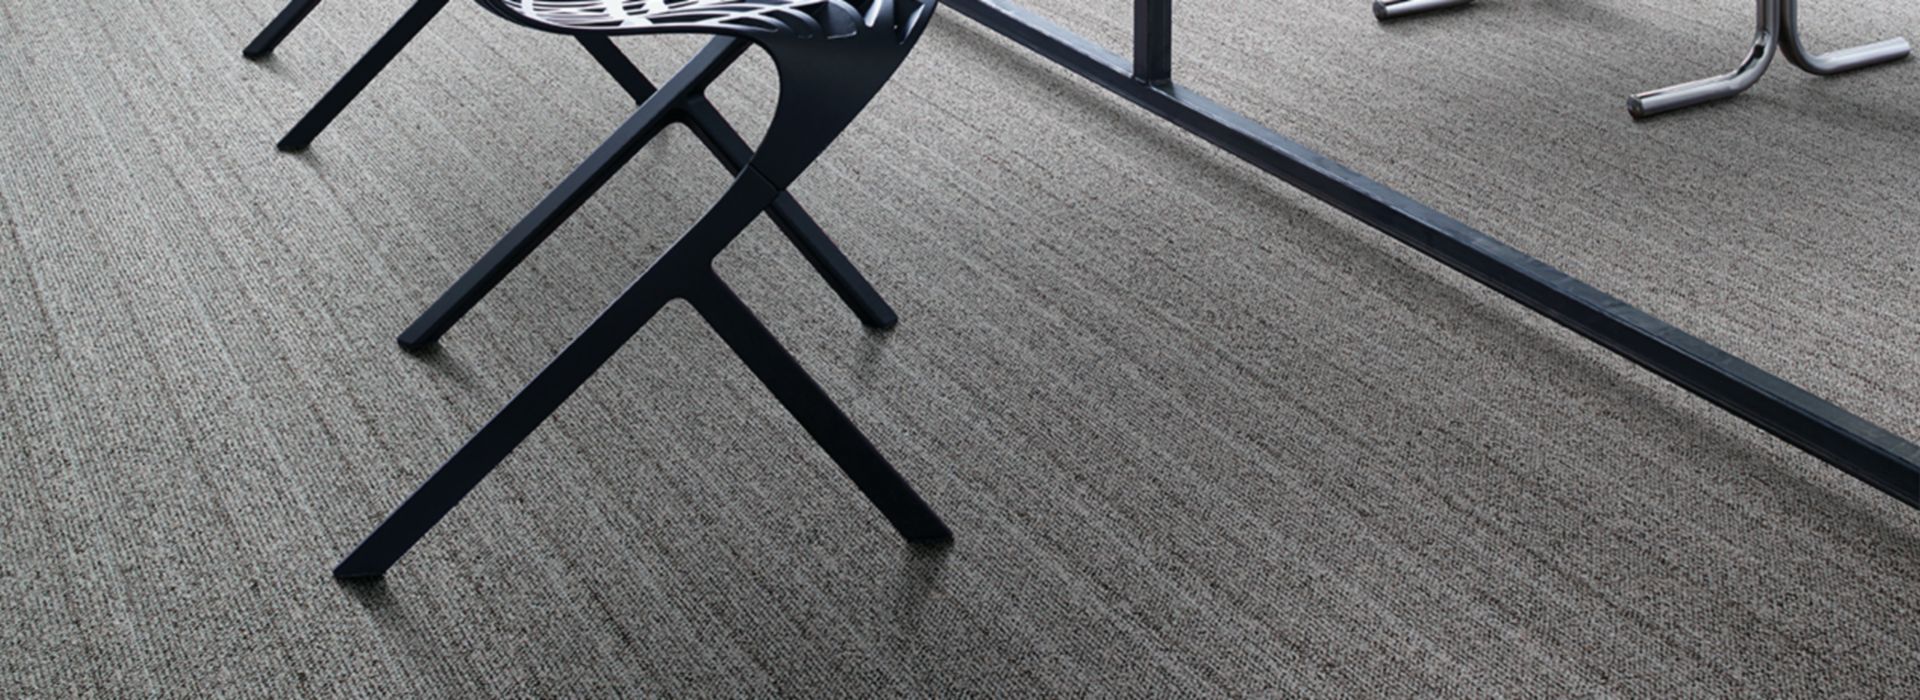 Interface WW860 plank carpet tile in work area with table and chairs image number 1